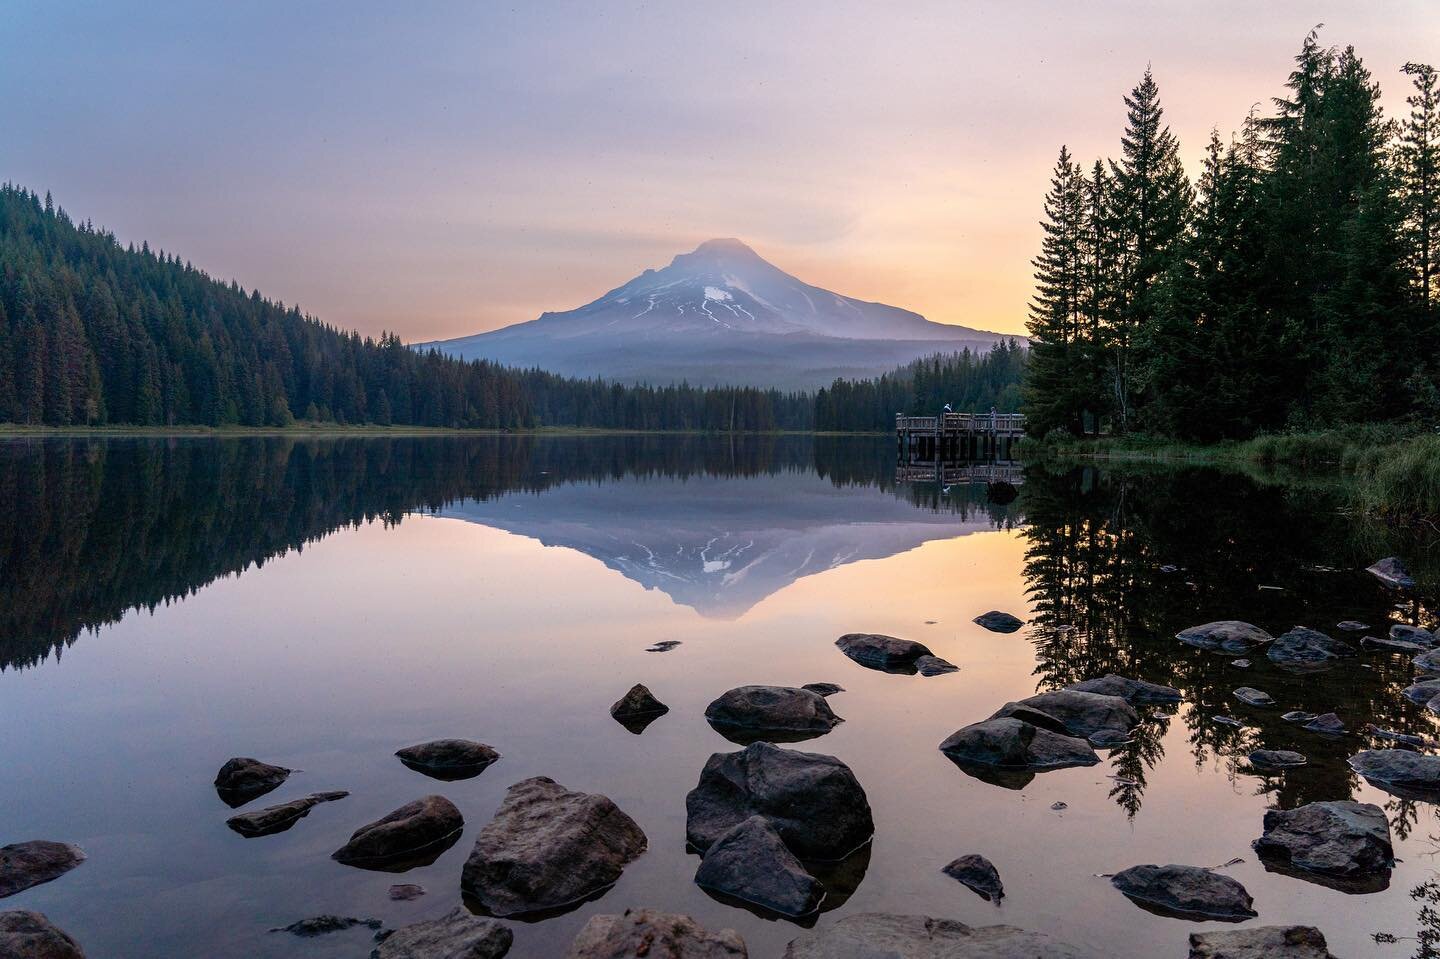 On a list of the world&rsquo;s most tranquil things you&rsquo;ll find a soft summer sunrise in Oregon. ⛅️
.
.
.
#summersunrise #trilliumlake #oregonexplored #lakereflection #mthood #pnwonderland #traveloregon